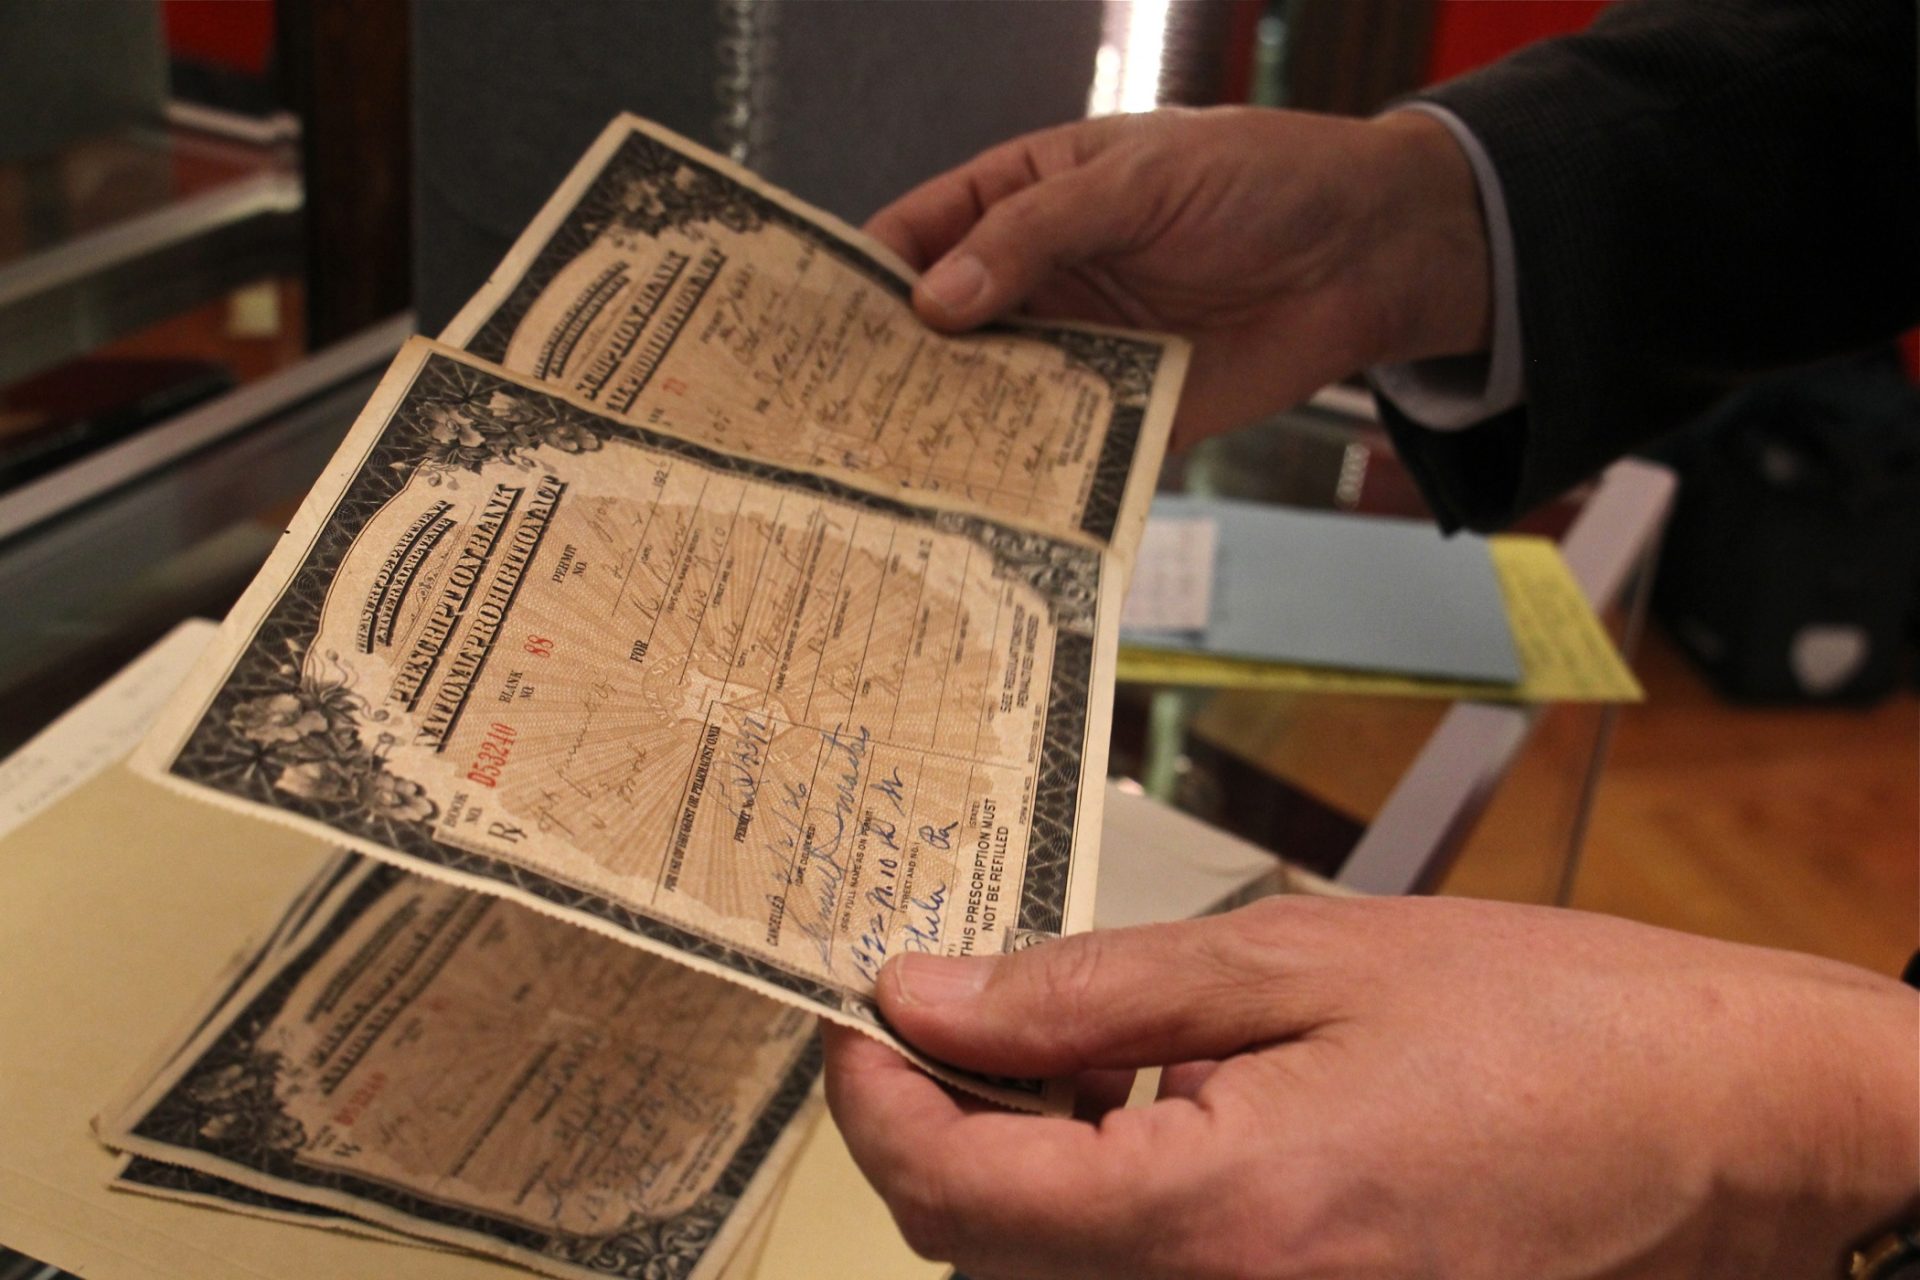 Historian Greg Higby looks through Prohibition Era prescriptions for whiskey in the University of Sciences collection.